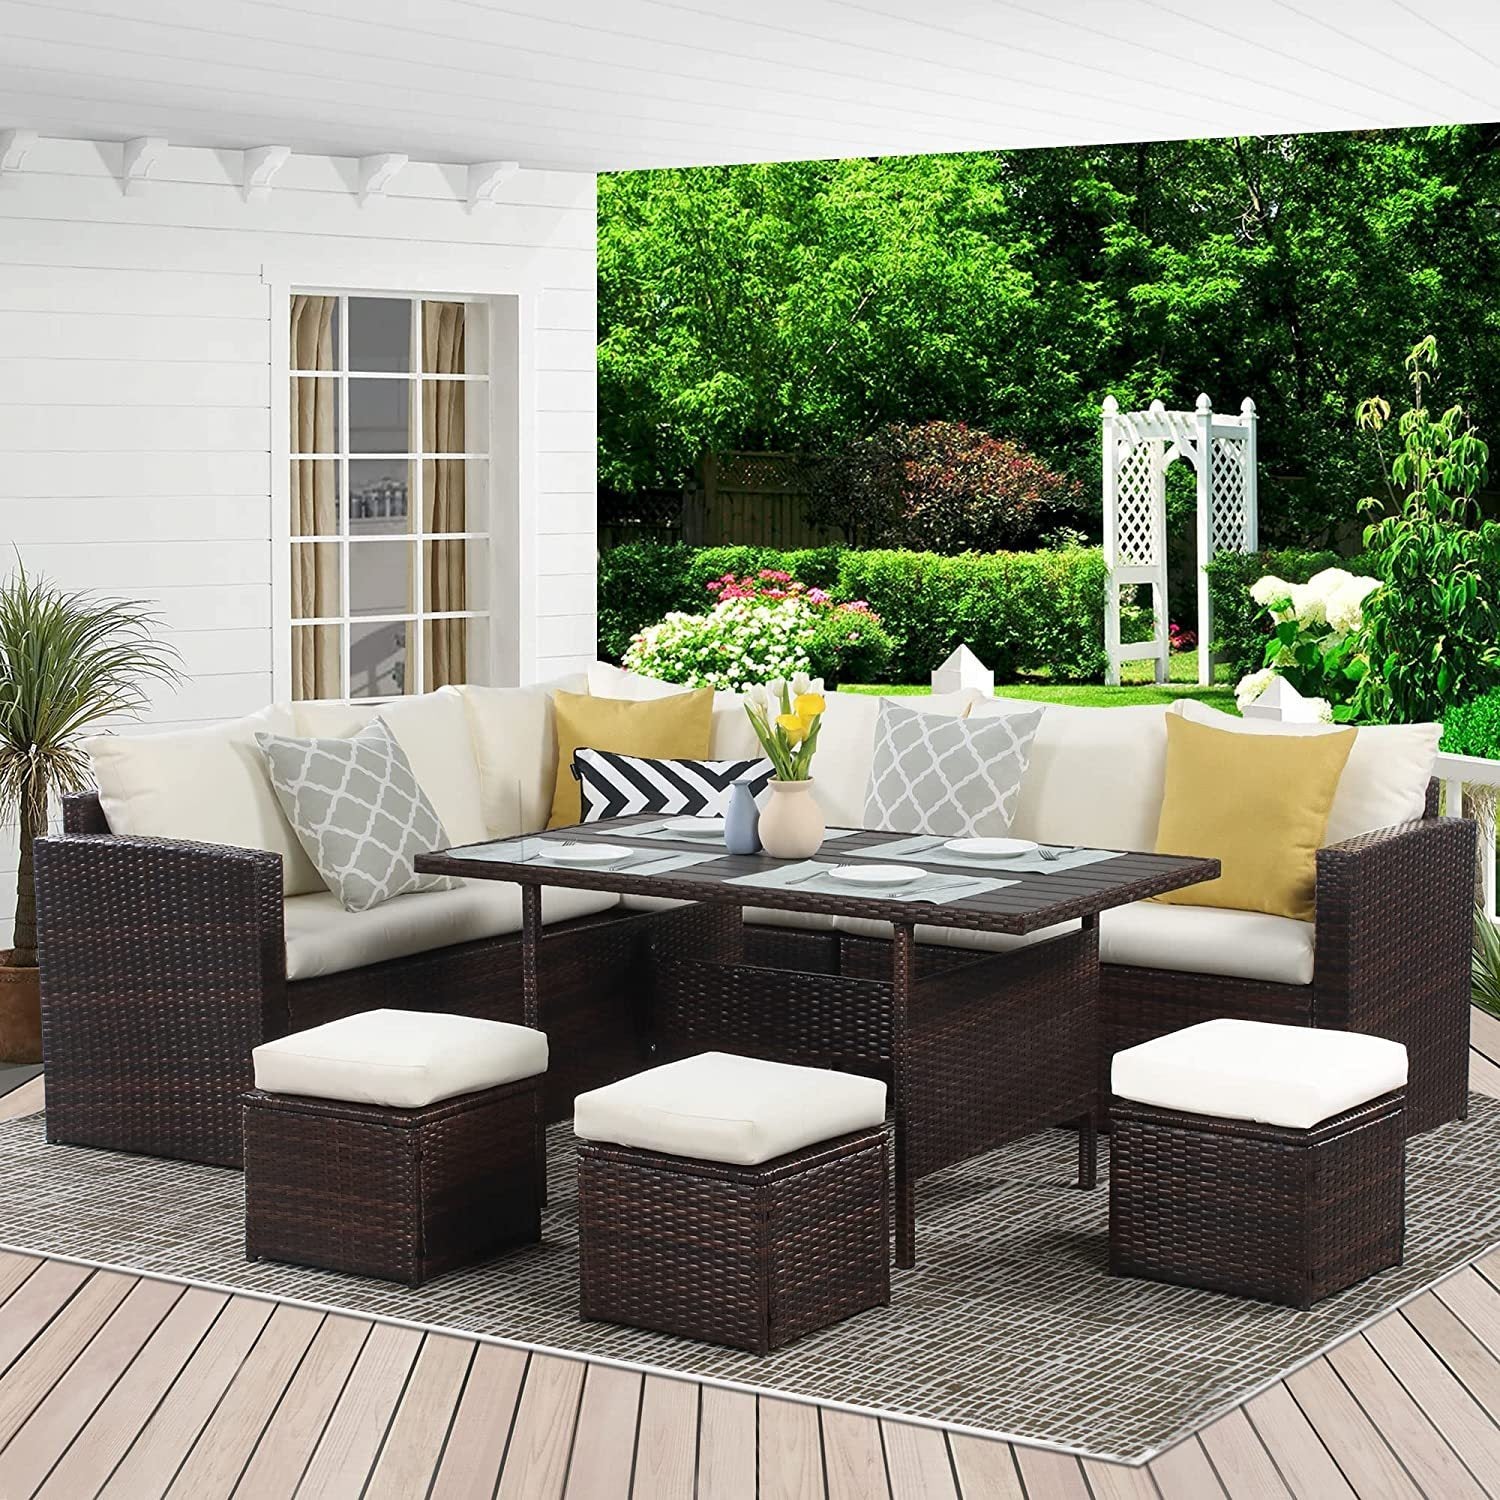 7-Pieces-PE-Rattan-Wicker-Patio-Dining-Sectional-Cusions-Sofa-Set-with-Ivory-cushions-Outdoor-Furniture-Sets